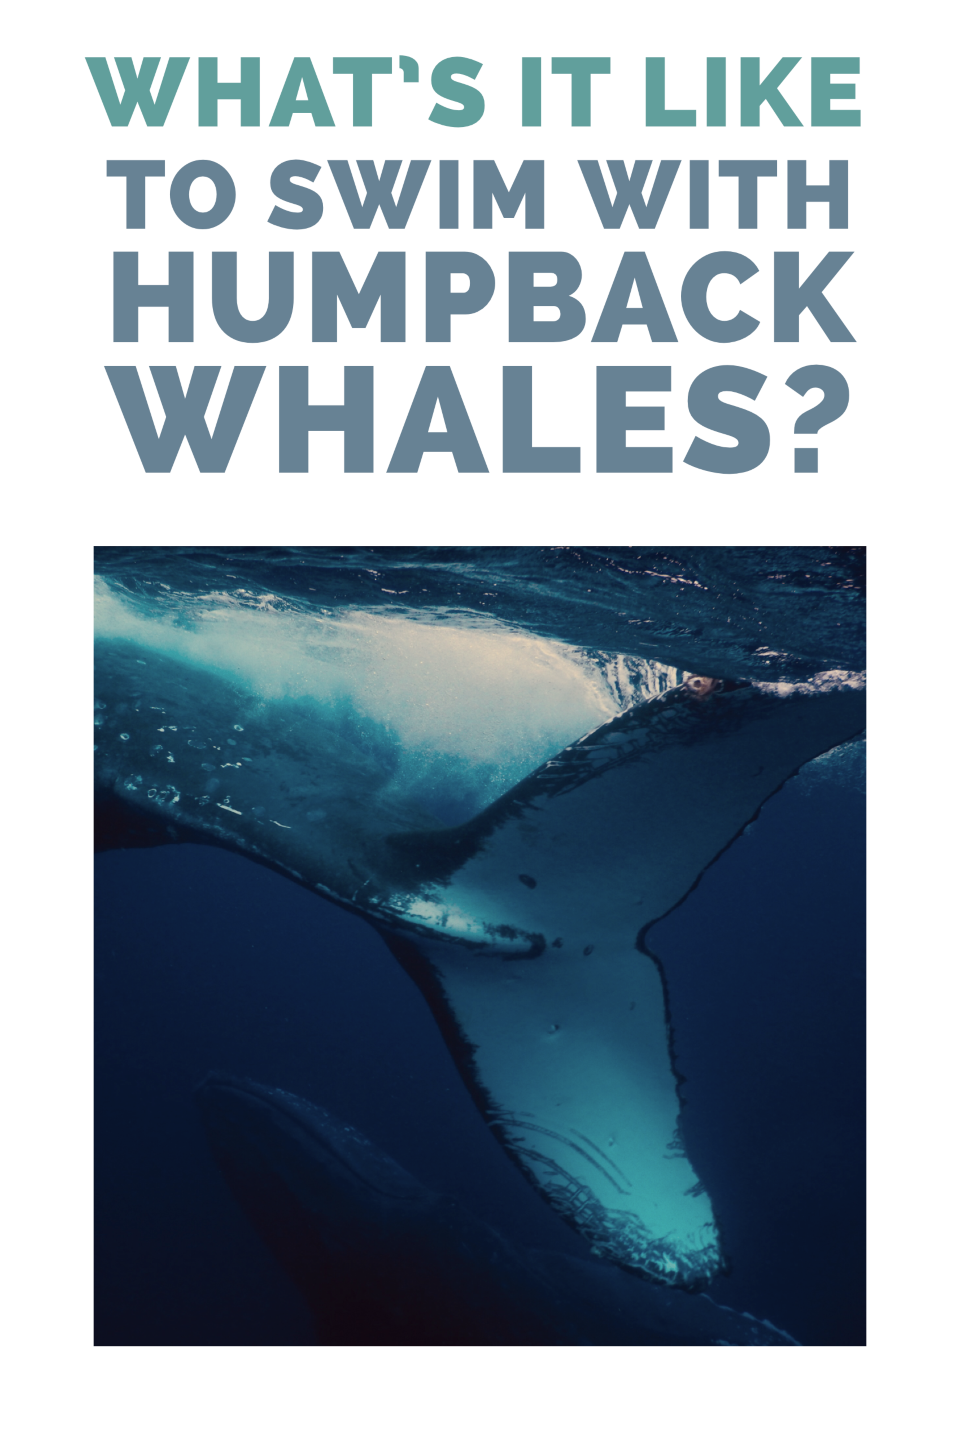 blog cover for what it's like to swim with humpback whales